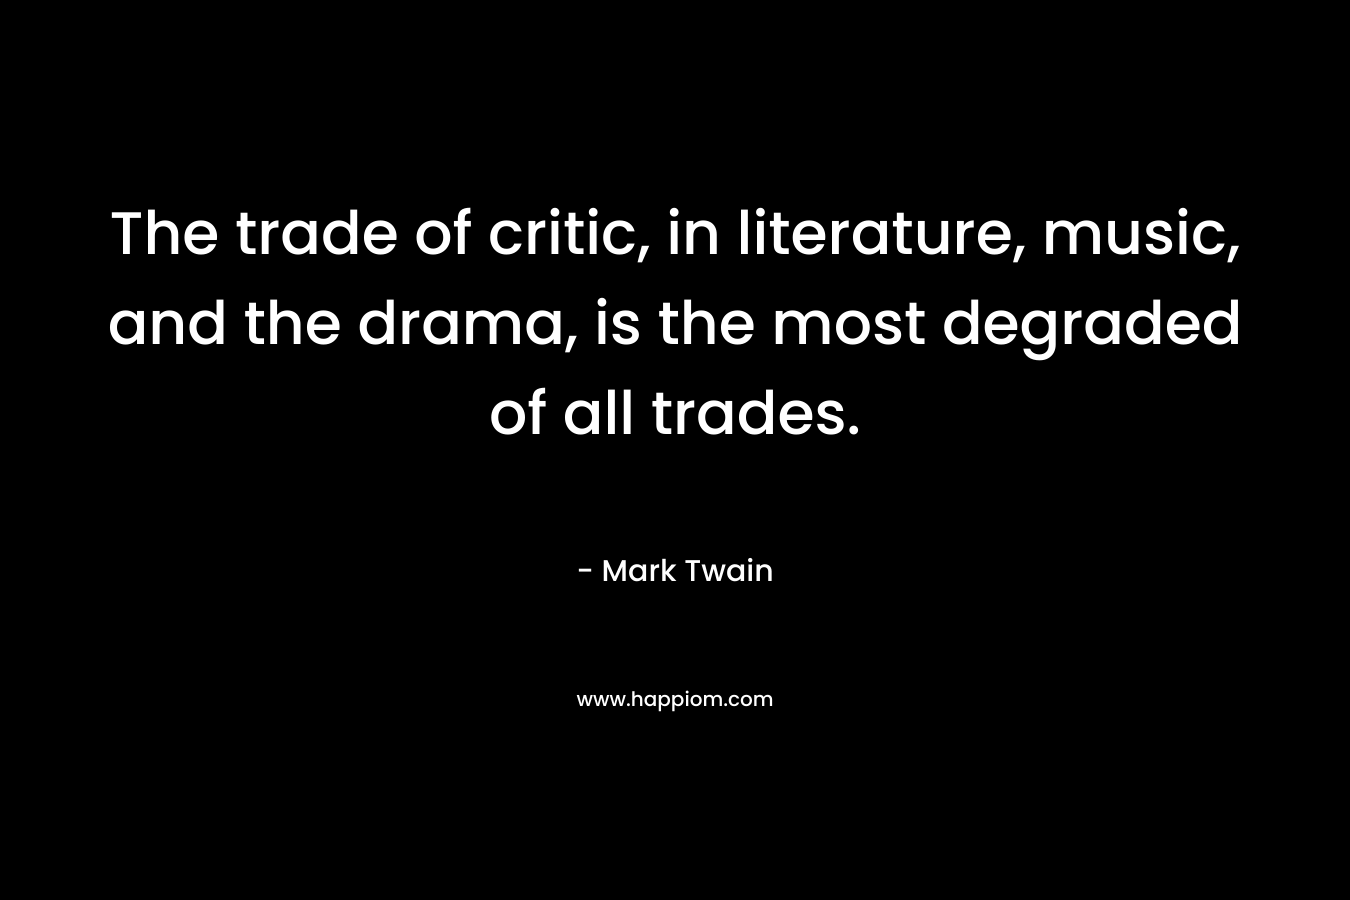 The trade of critic, in literature, music, and the drama, is the most degraded of all trades. – Mark Twain